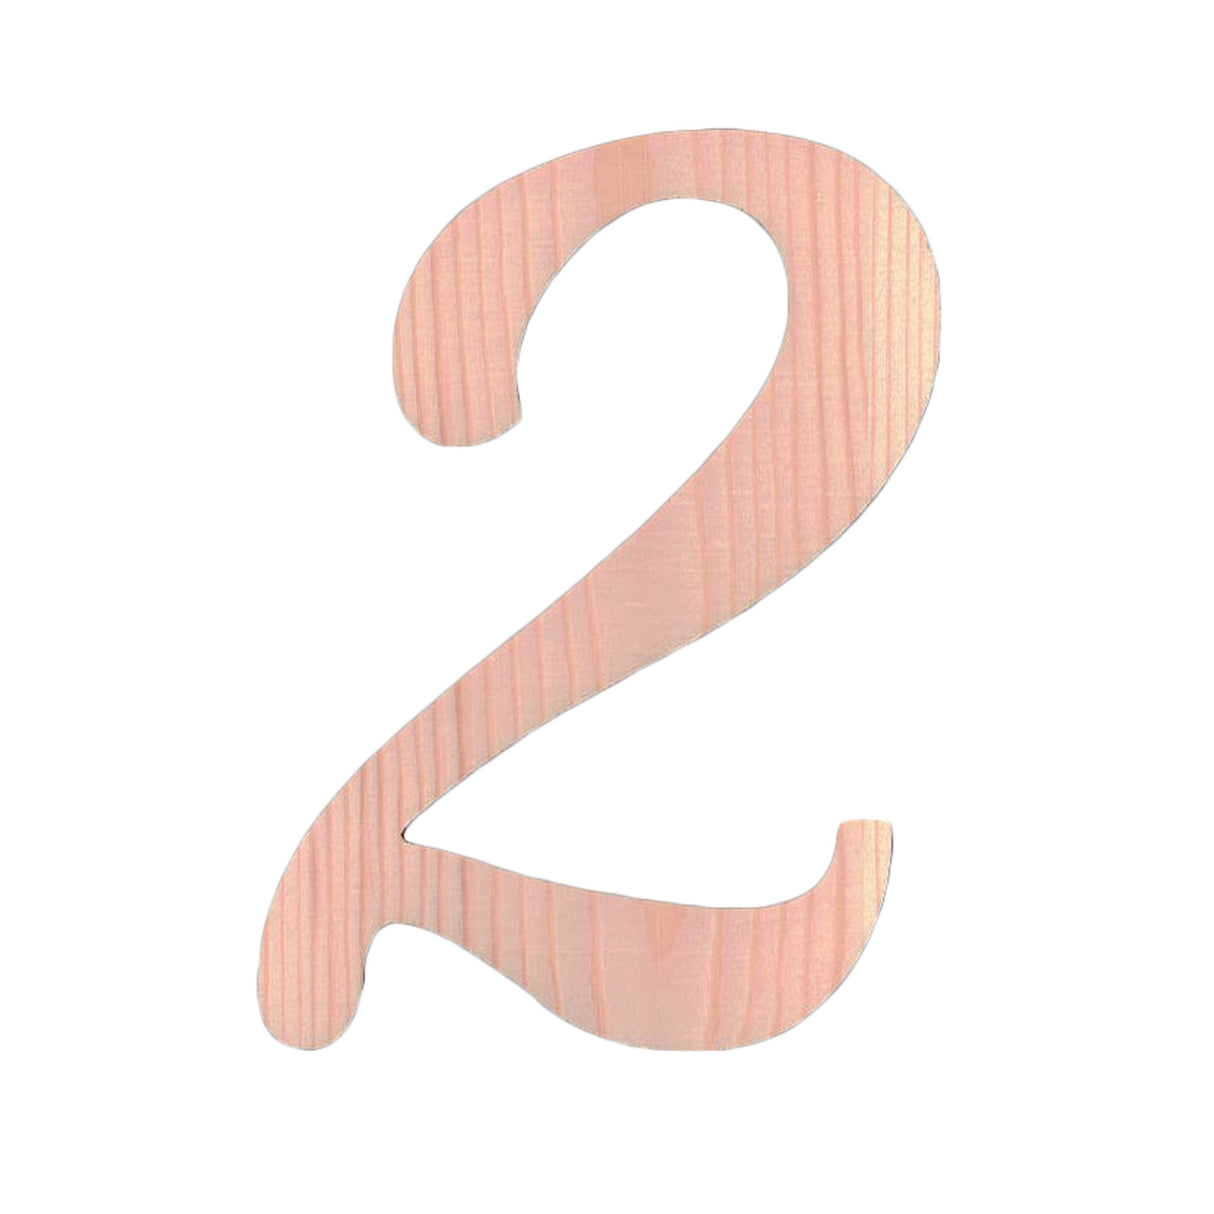 Unfinished Wooden Playball Italic Number 2 (6.25 Inches) in Beige color,  shape